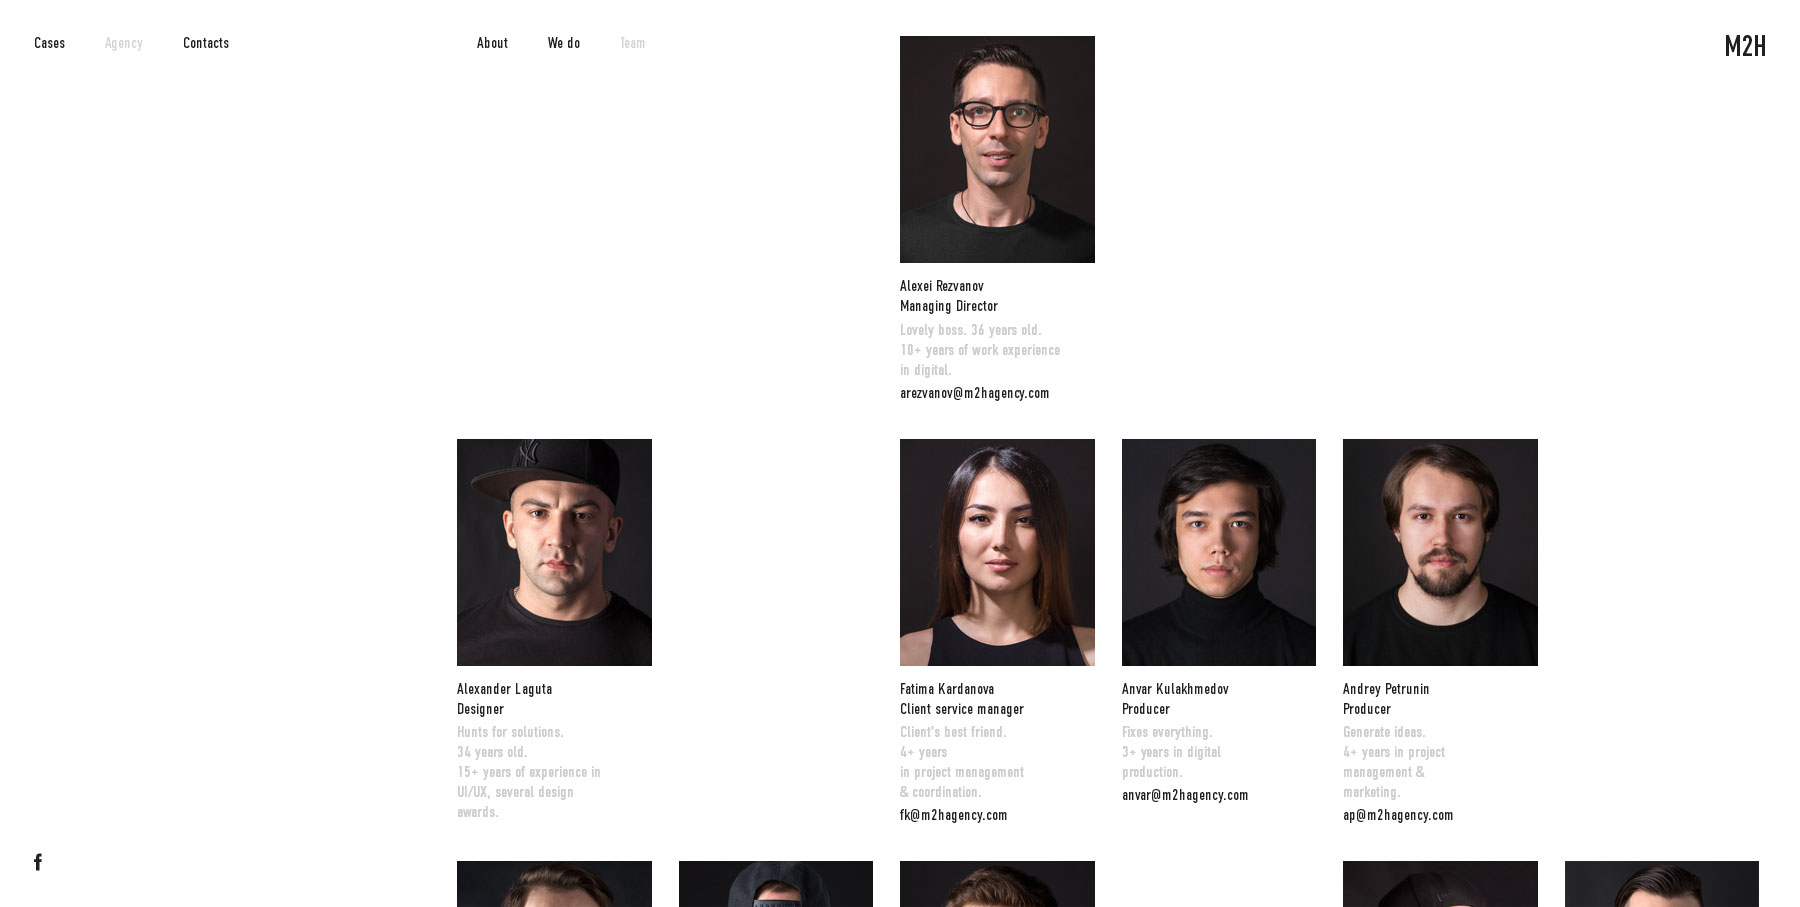 M2H agency - Website of the Day